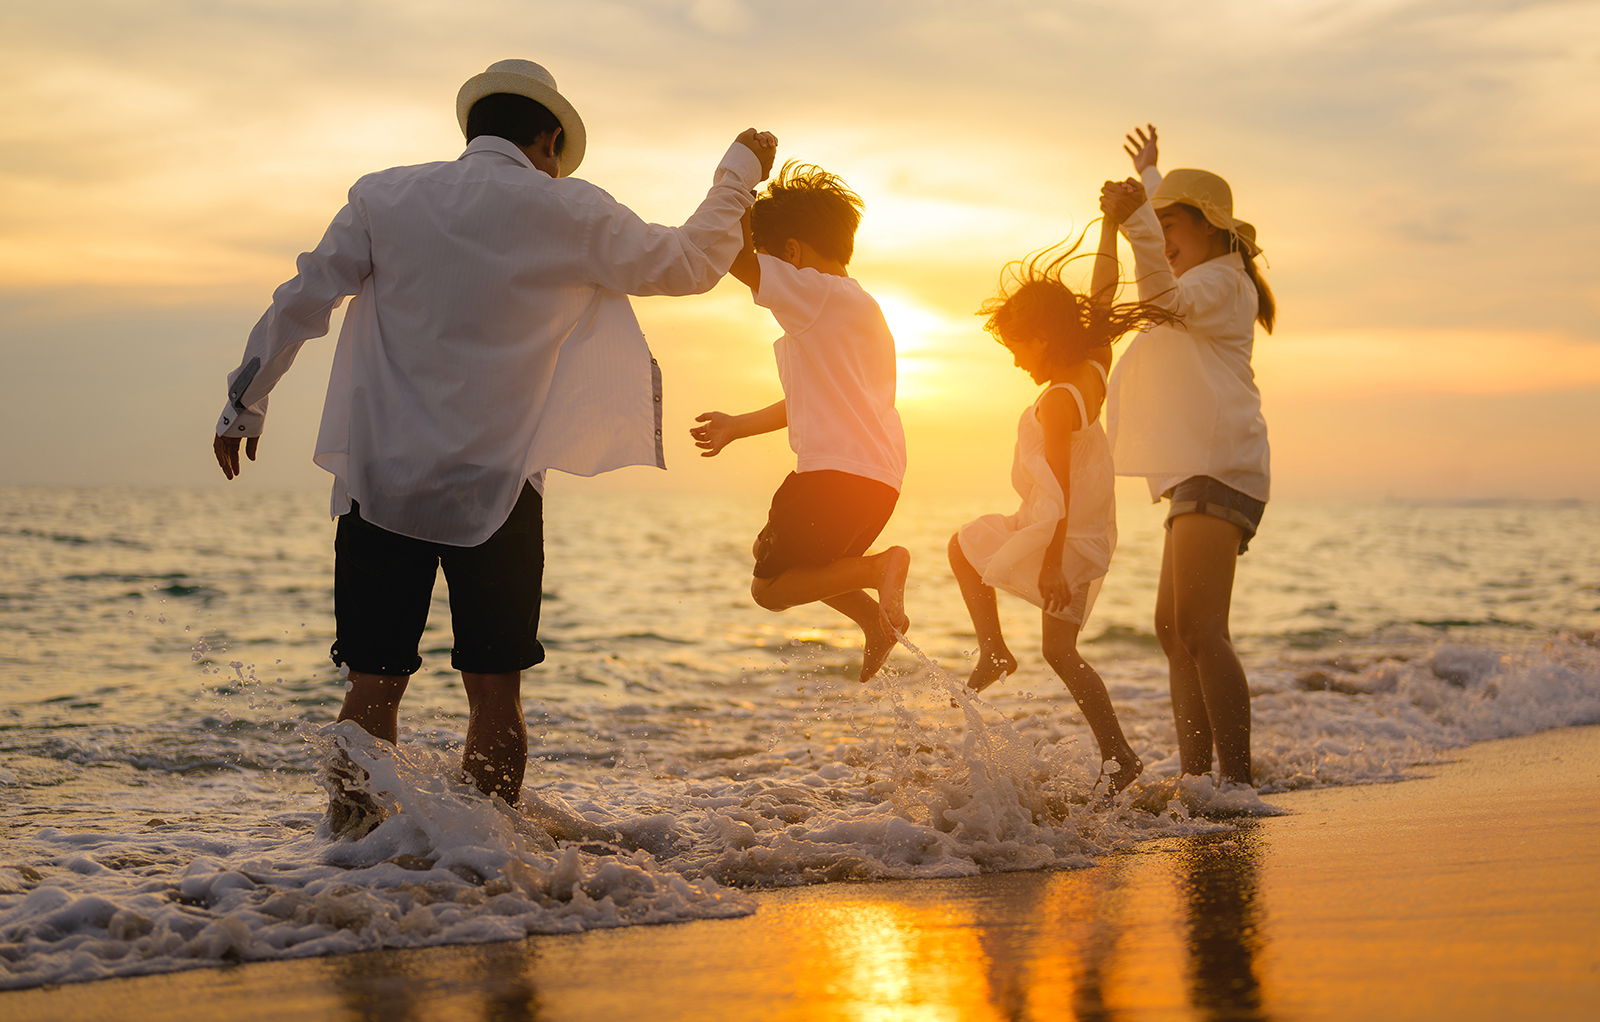 Happy family enjoying together on beach on holiday vacation, Family with beach travel, People enjoying with holiday vacation, High quality photo.